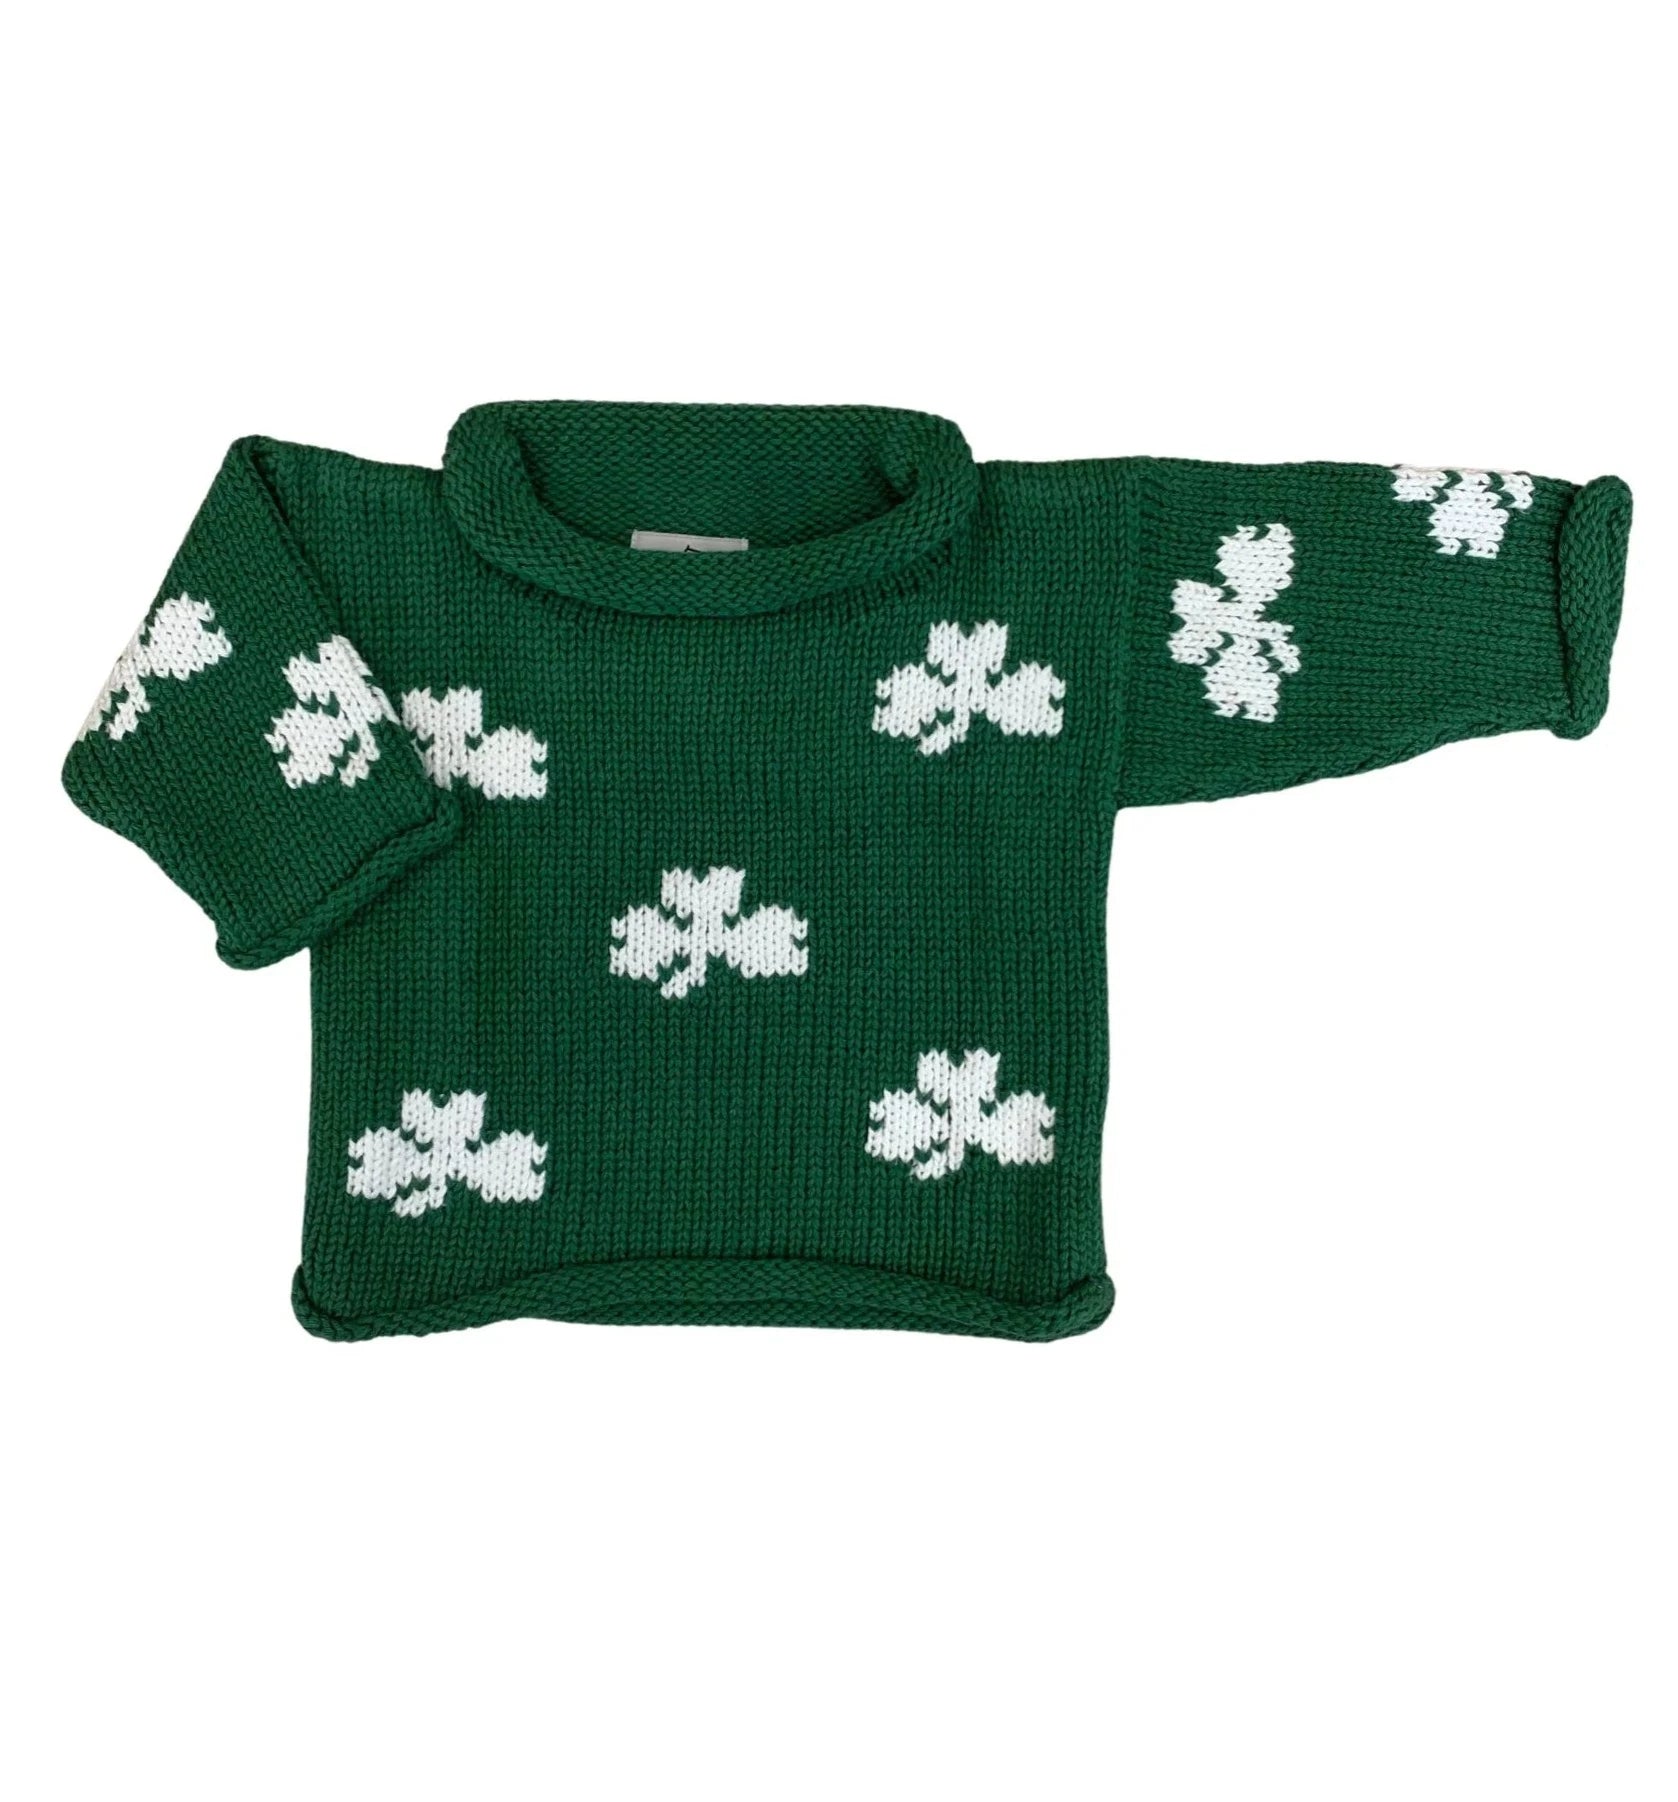 long sleeve green sweater with white shamrocks all over